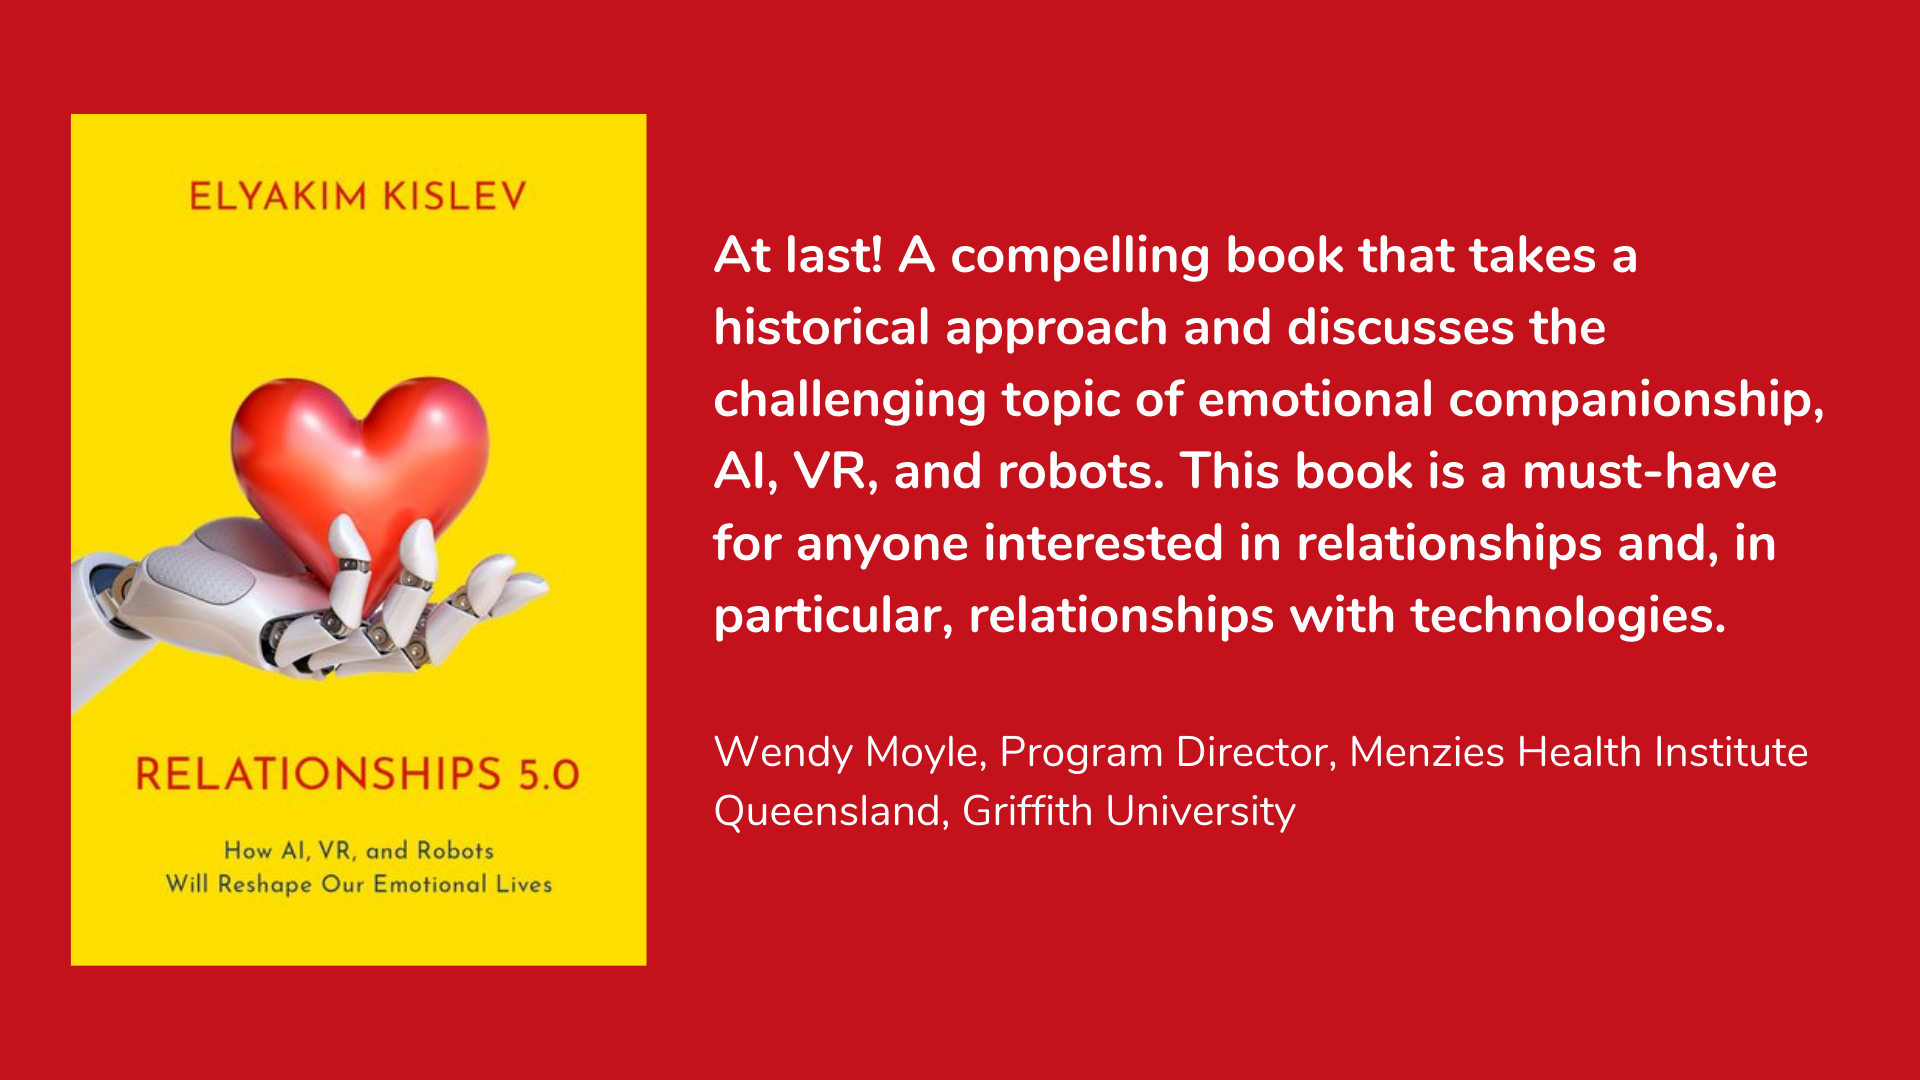 Relationships 5.0: How AI, VR, and Robots Will Reshape Our Emotional Lives by Dr. Elyakim Kislev, book cover and description.